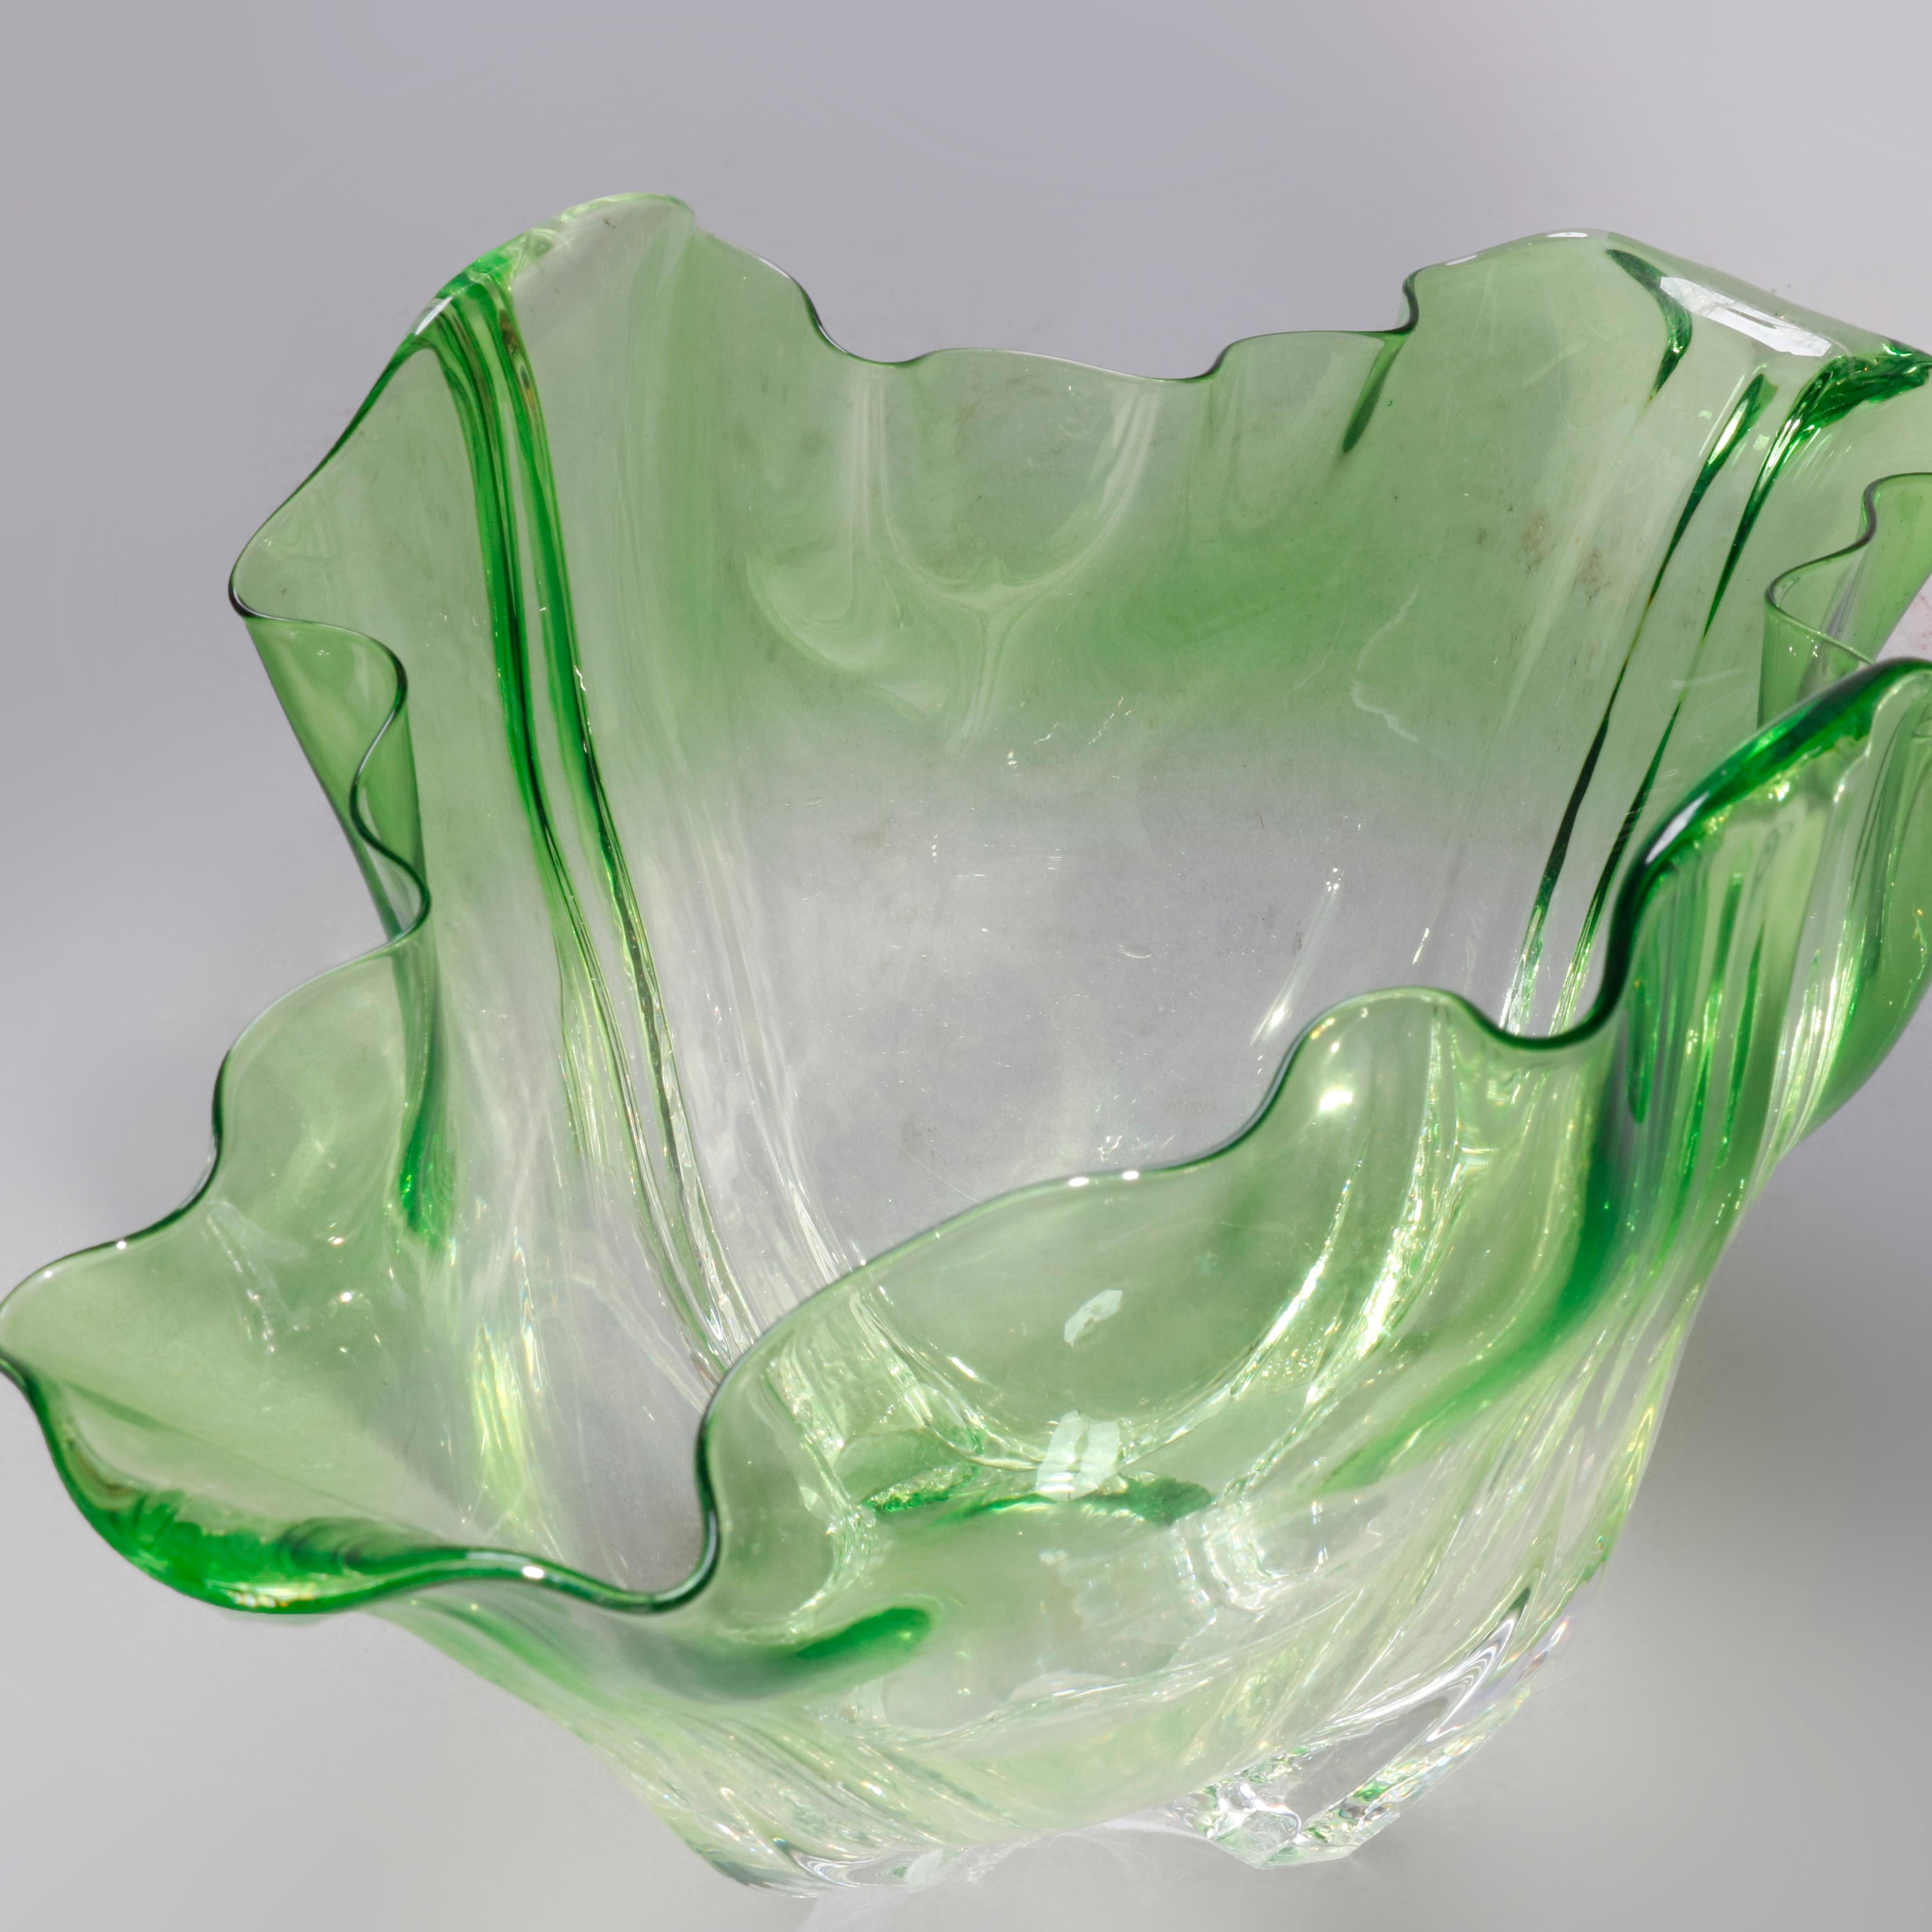 An antique center bowl by Steuben offers emerald green to colorless art glass construction in ruffled handkerchief form, unsigned, circa 1930

Measures- 6